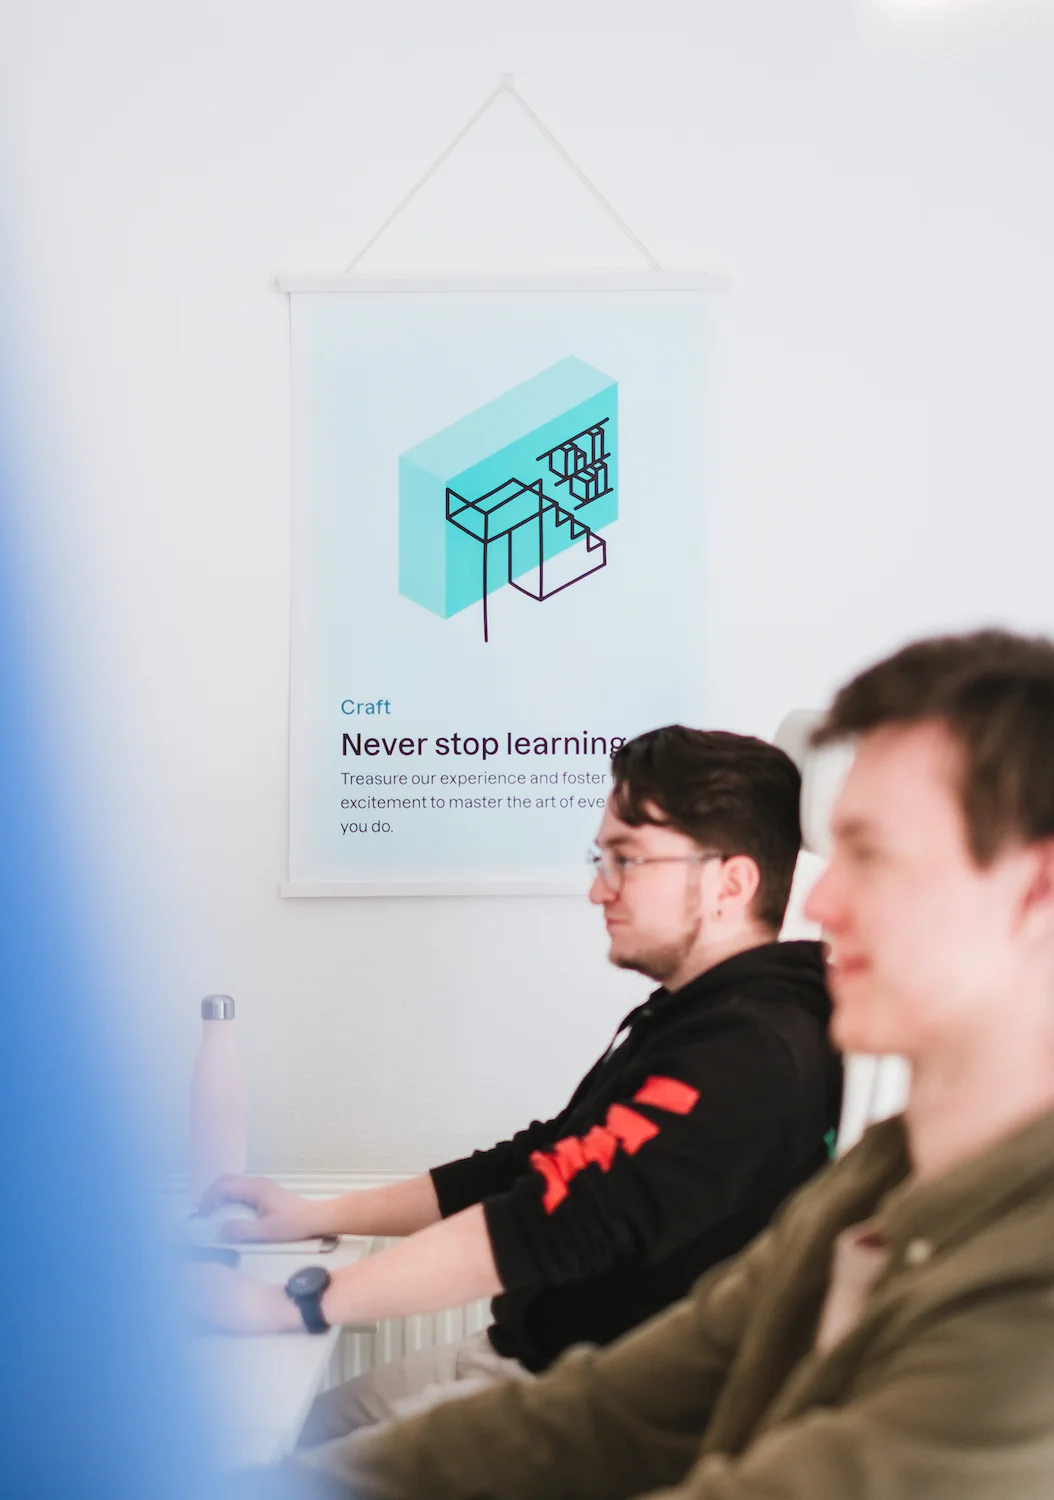 Two Yummygum employes as seen from the side out of focus with a wall mounted poster in focus in the center of the photo that shows an illustration of a library with stairs and some text explaining the illustration